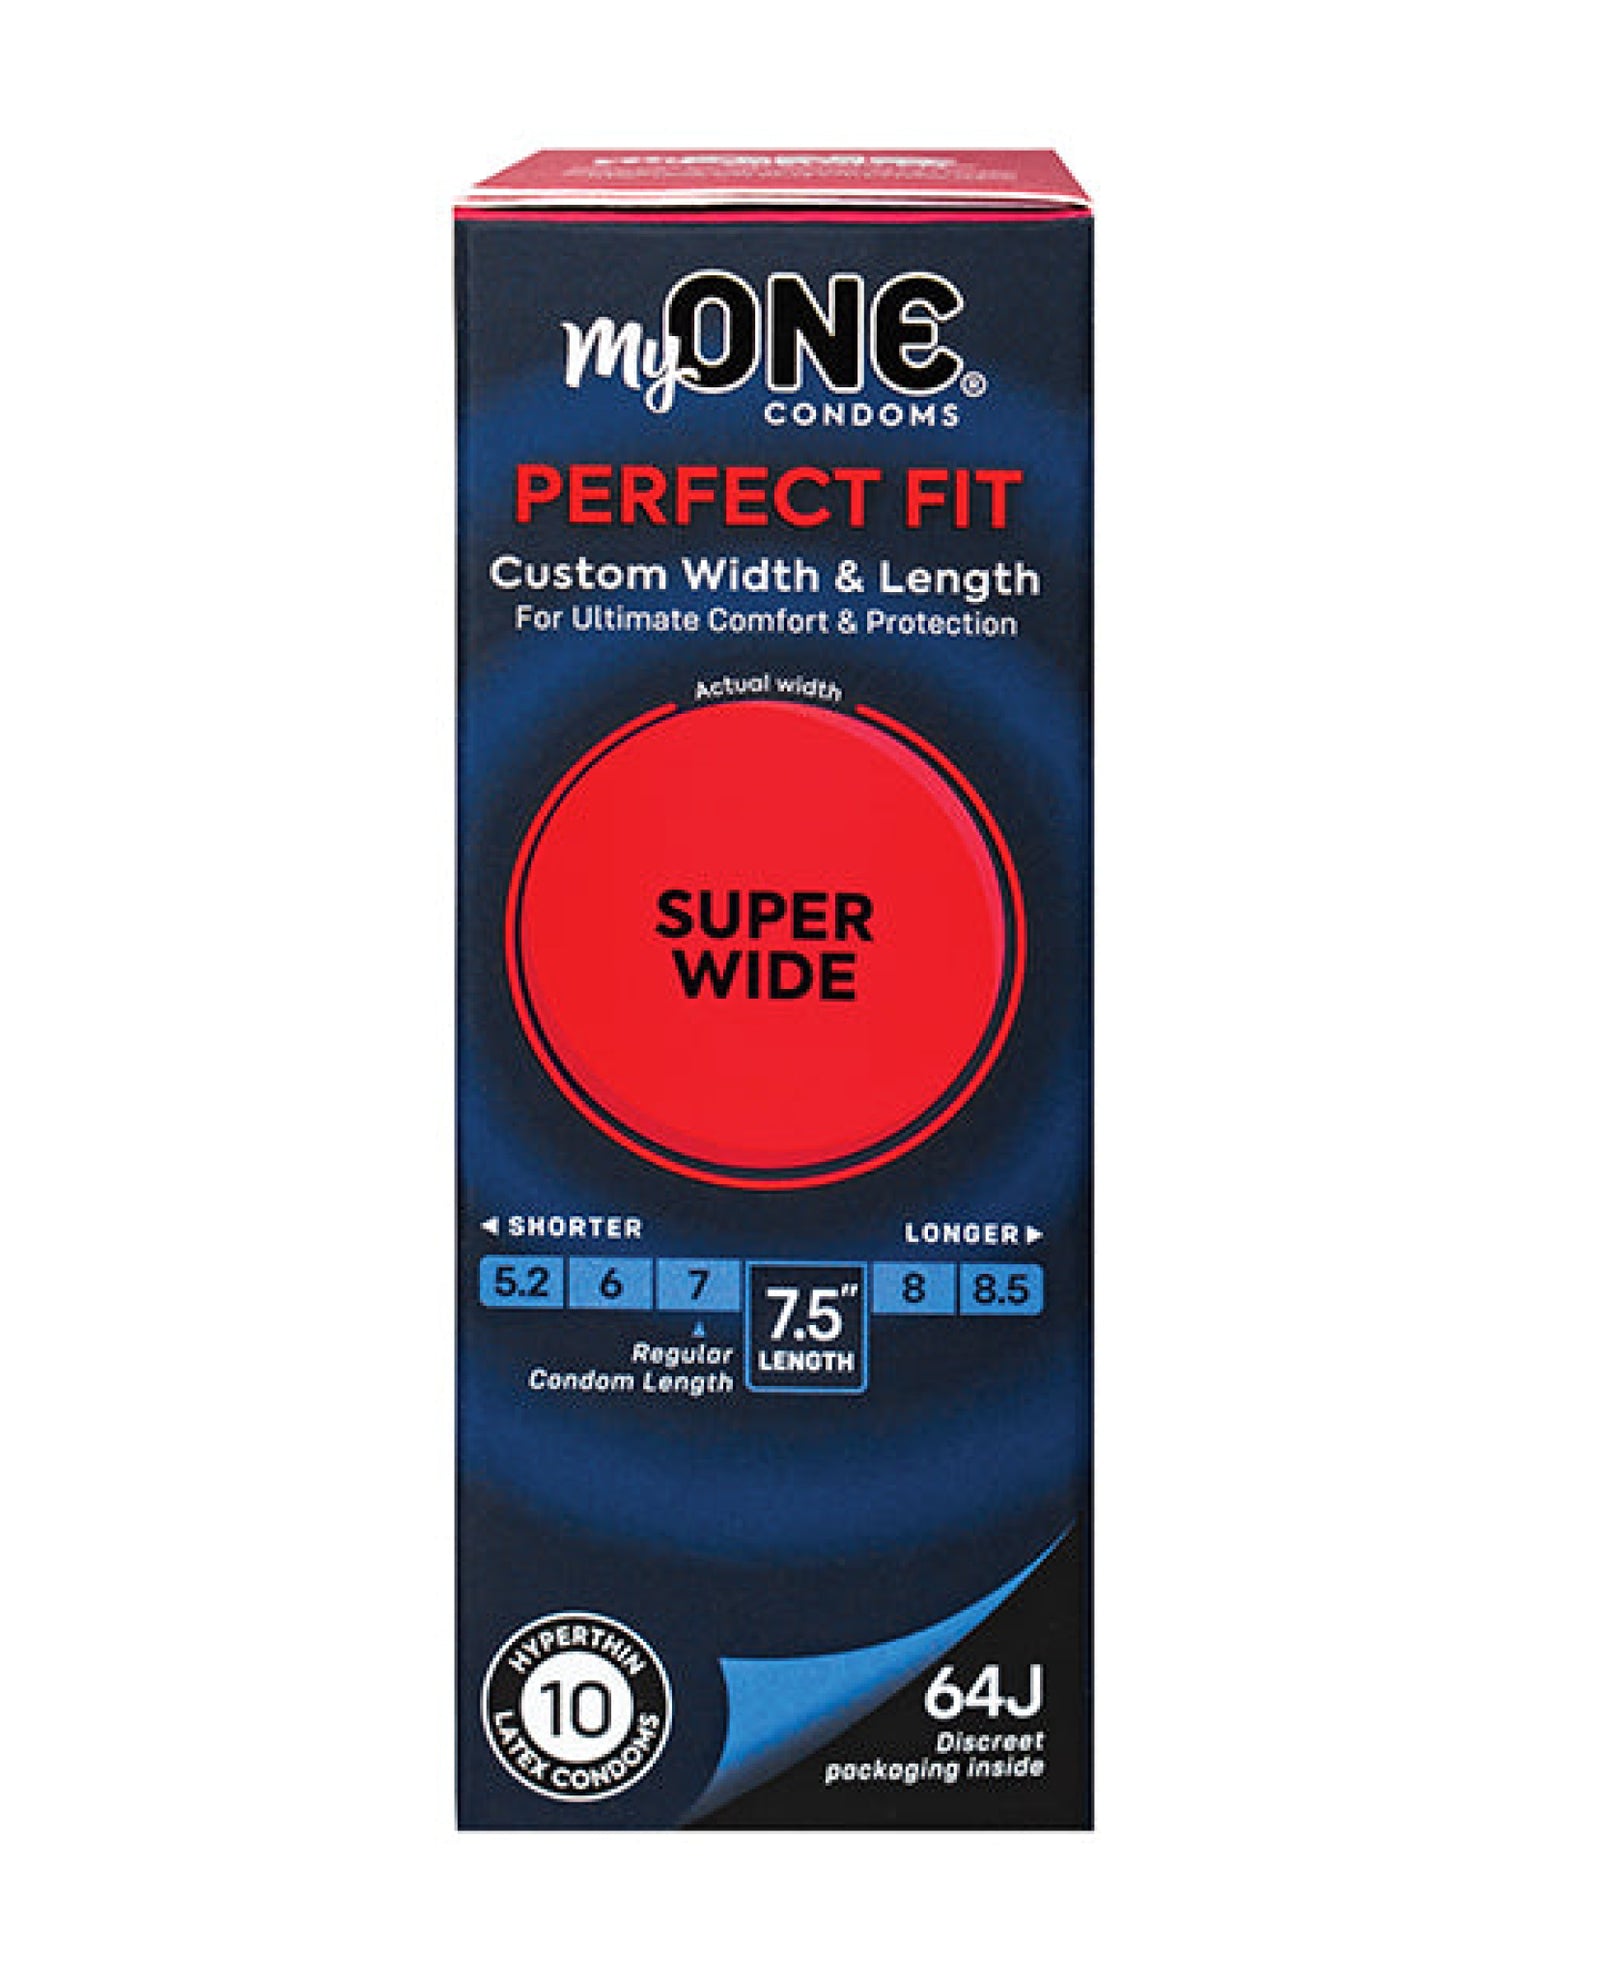 My One Super Wide Condoms - Pack of 10 Paradise Marketing